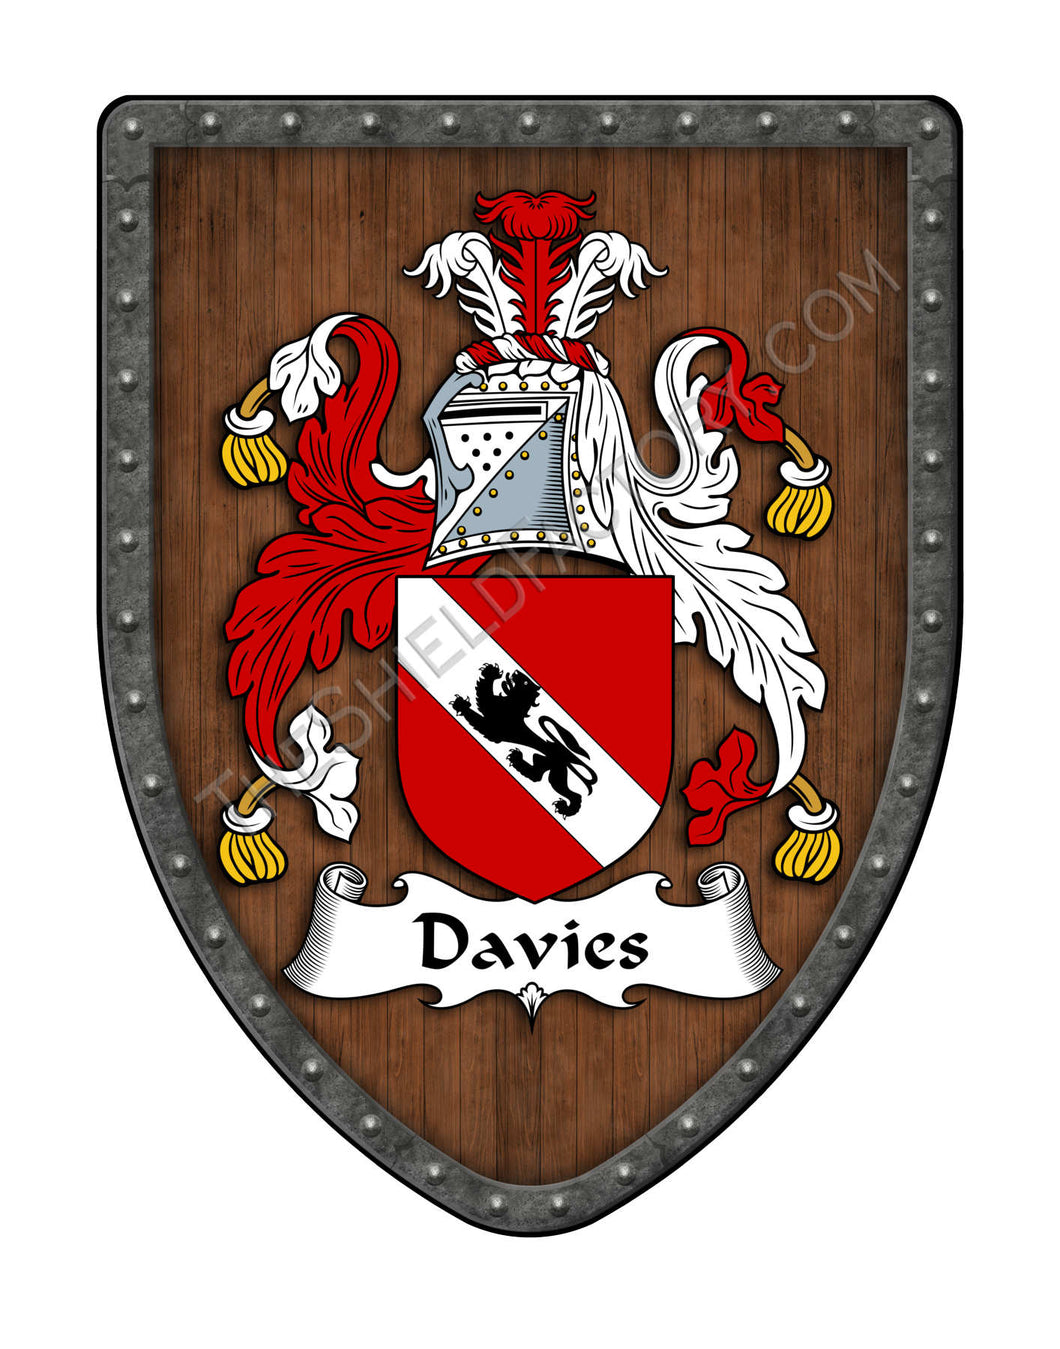 Davies Coat of Arms Shield Family Crest